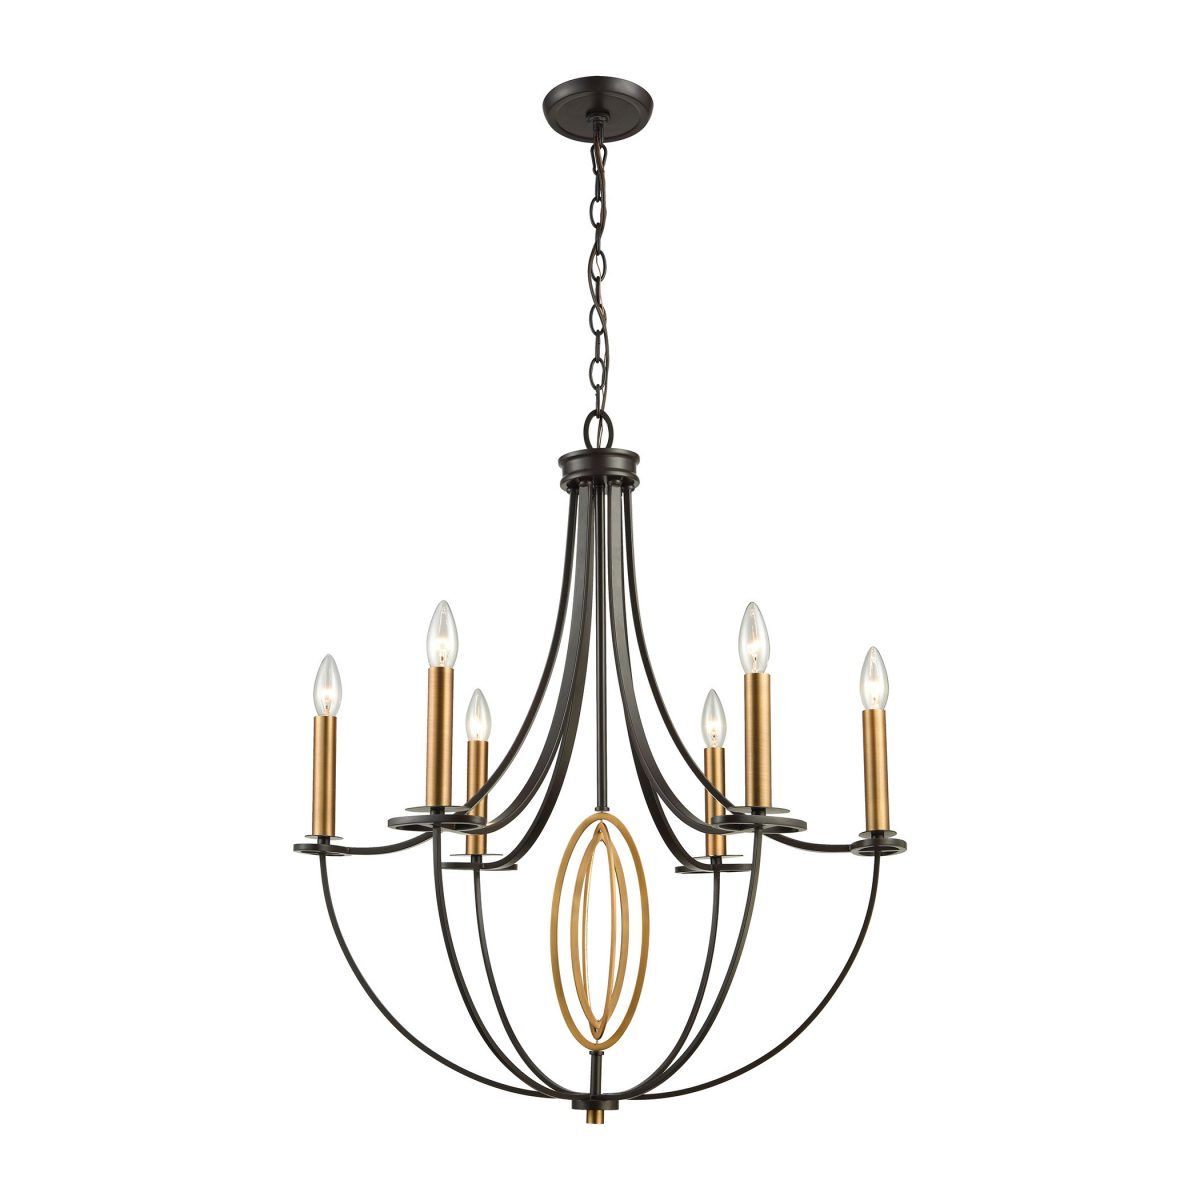 Current Elk Lighting Dione 6 Light Chandelier In Oil Rubbed Bronze Throughout Oil Rubbed Bronze And Antique Brass Four Light Chandeliers (View 16 of 20)